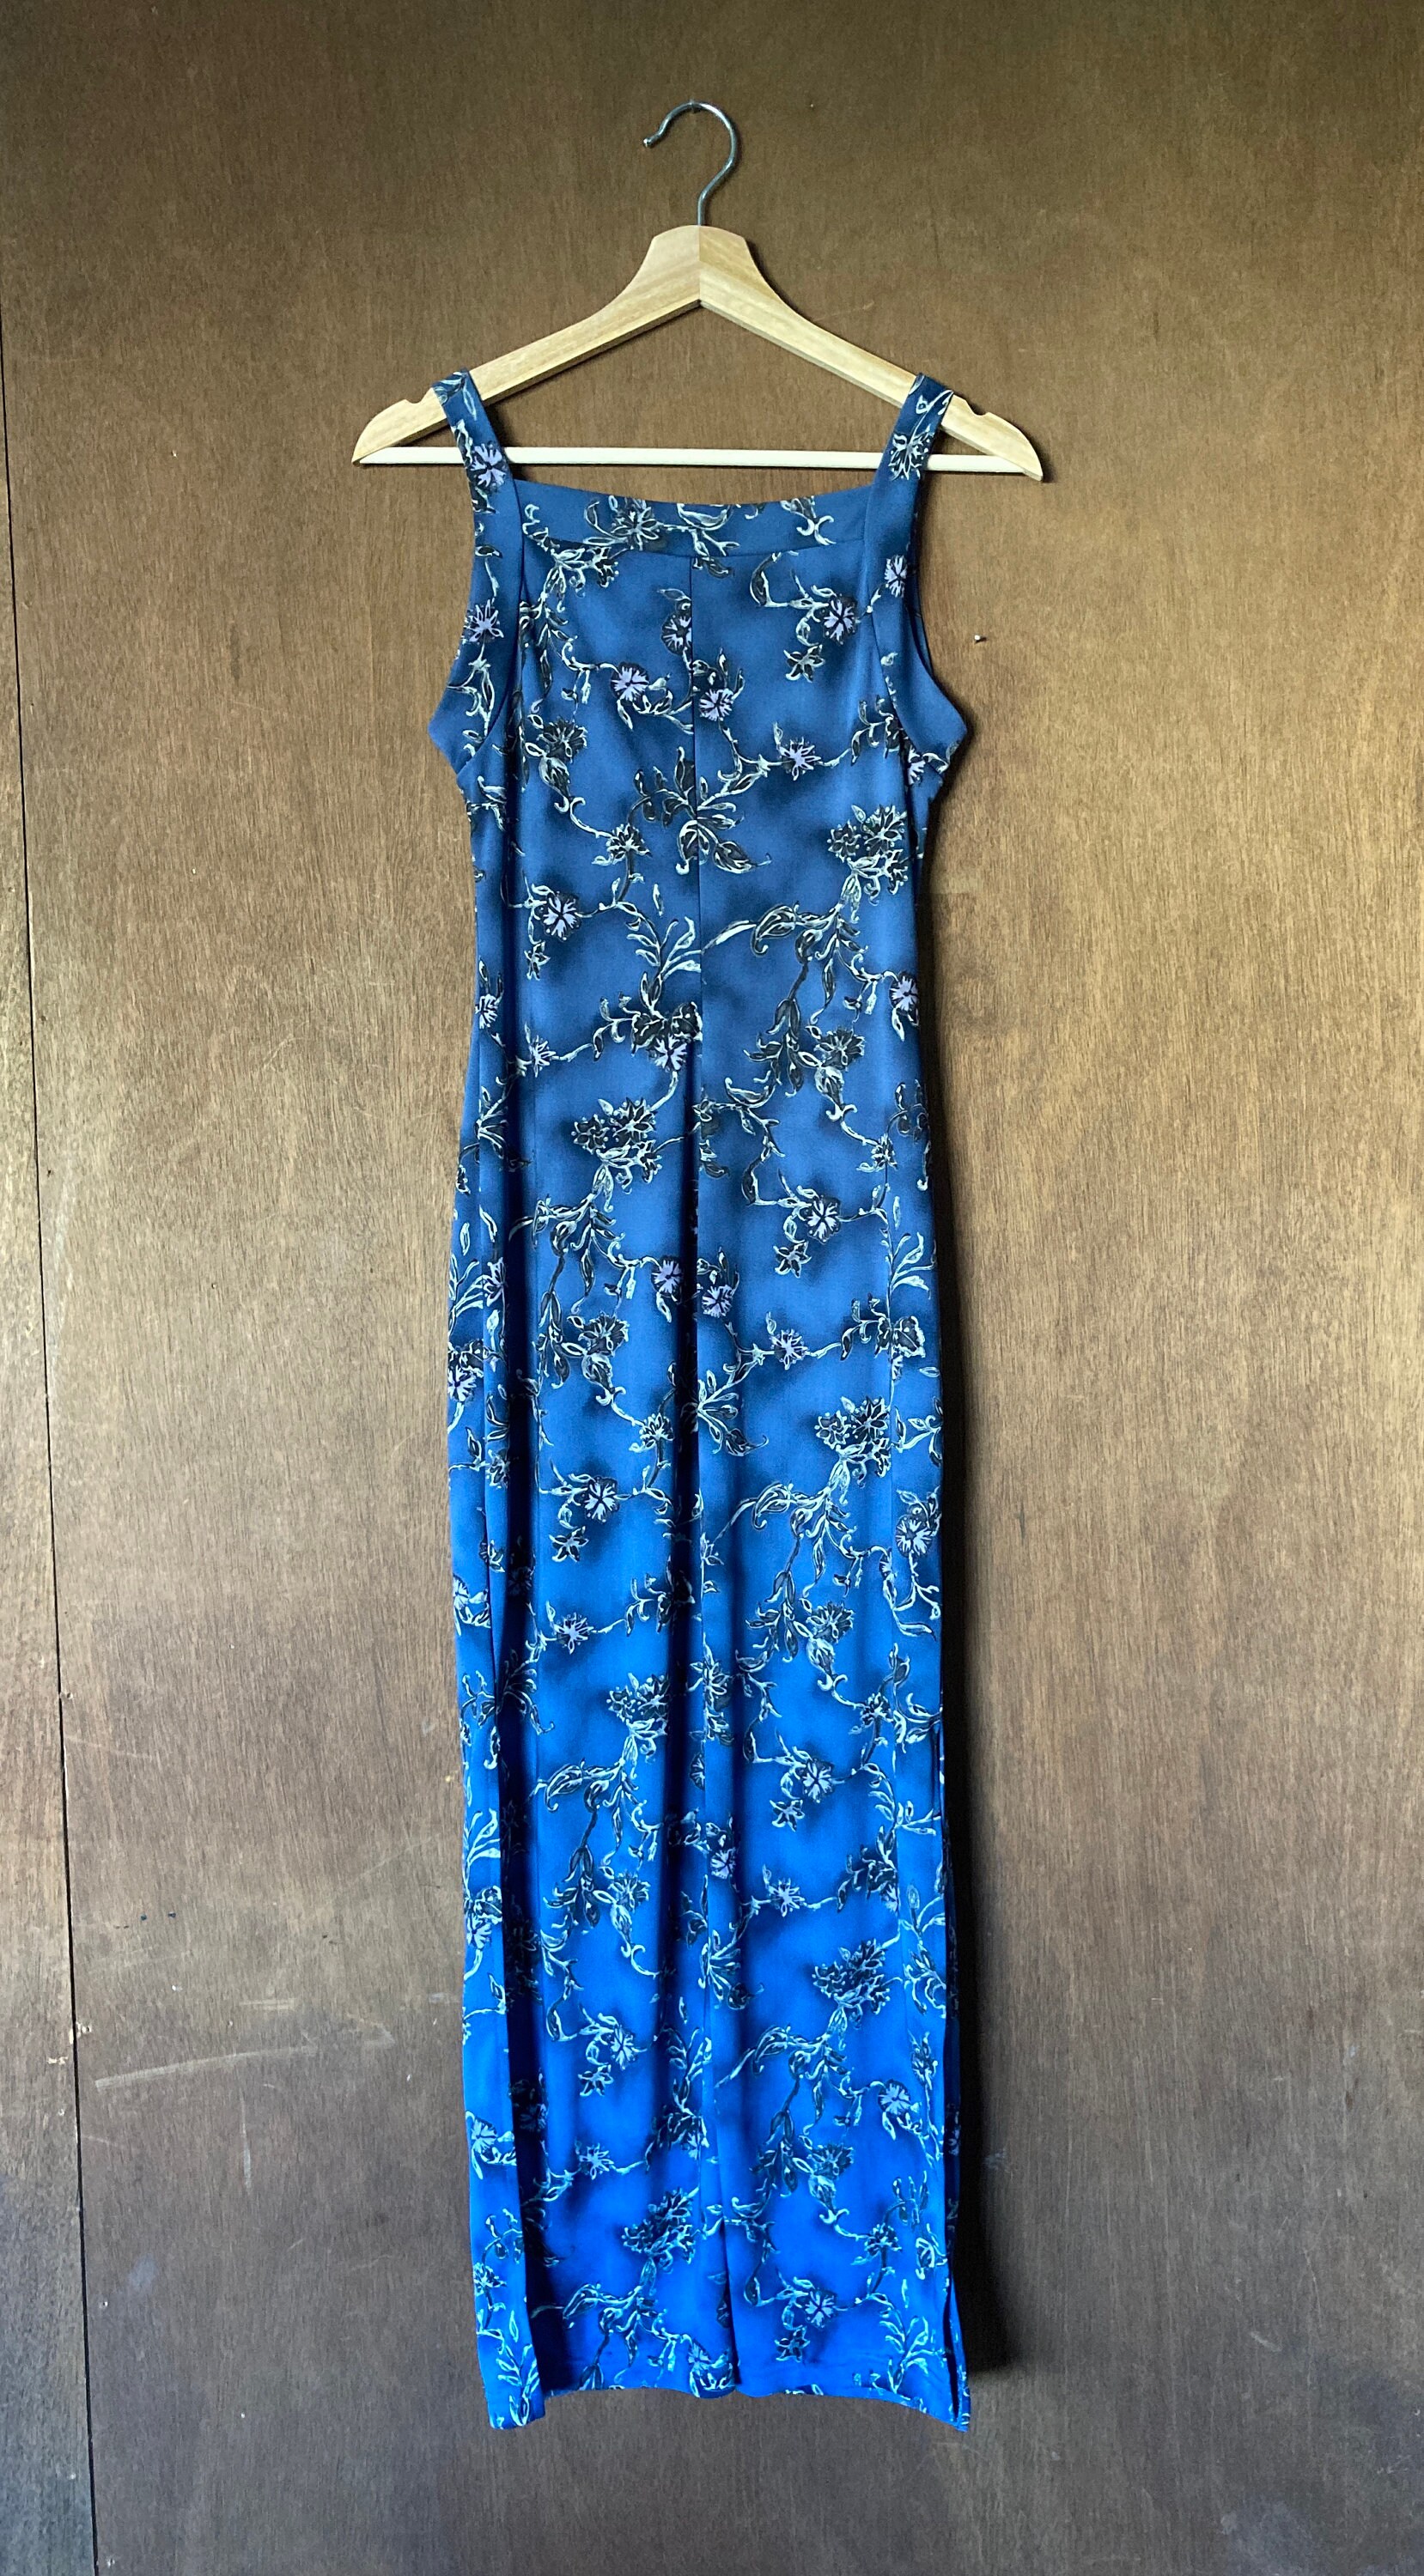 Tight Blue Floral 90's Dress//s-m - Etsy